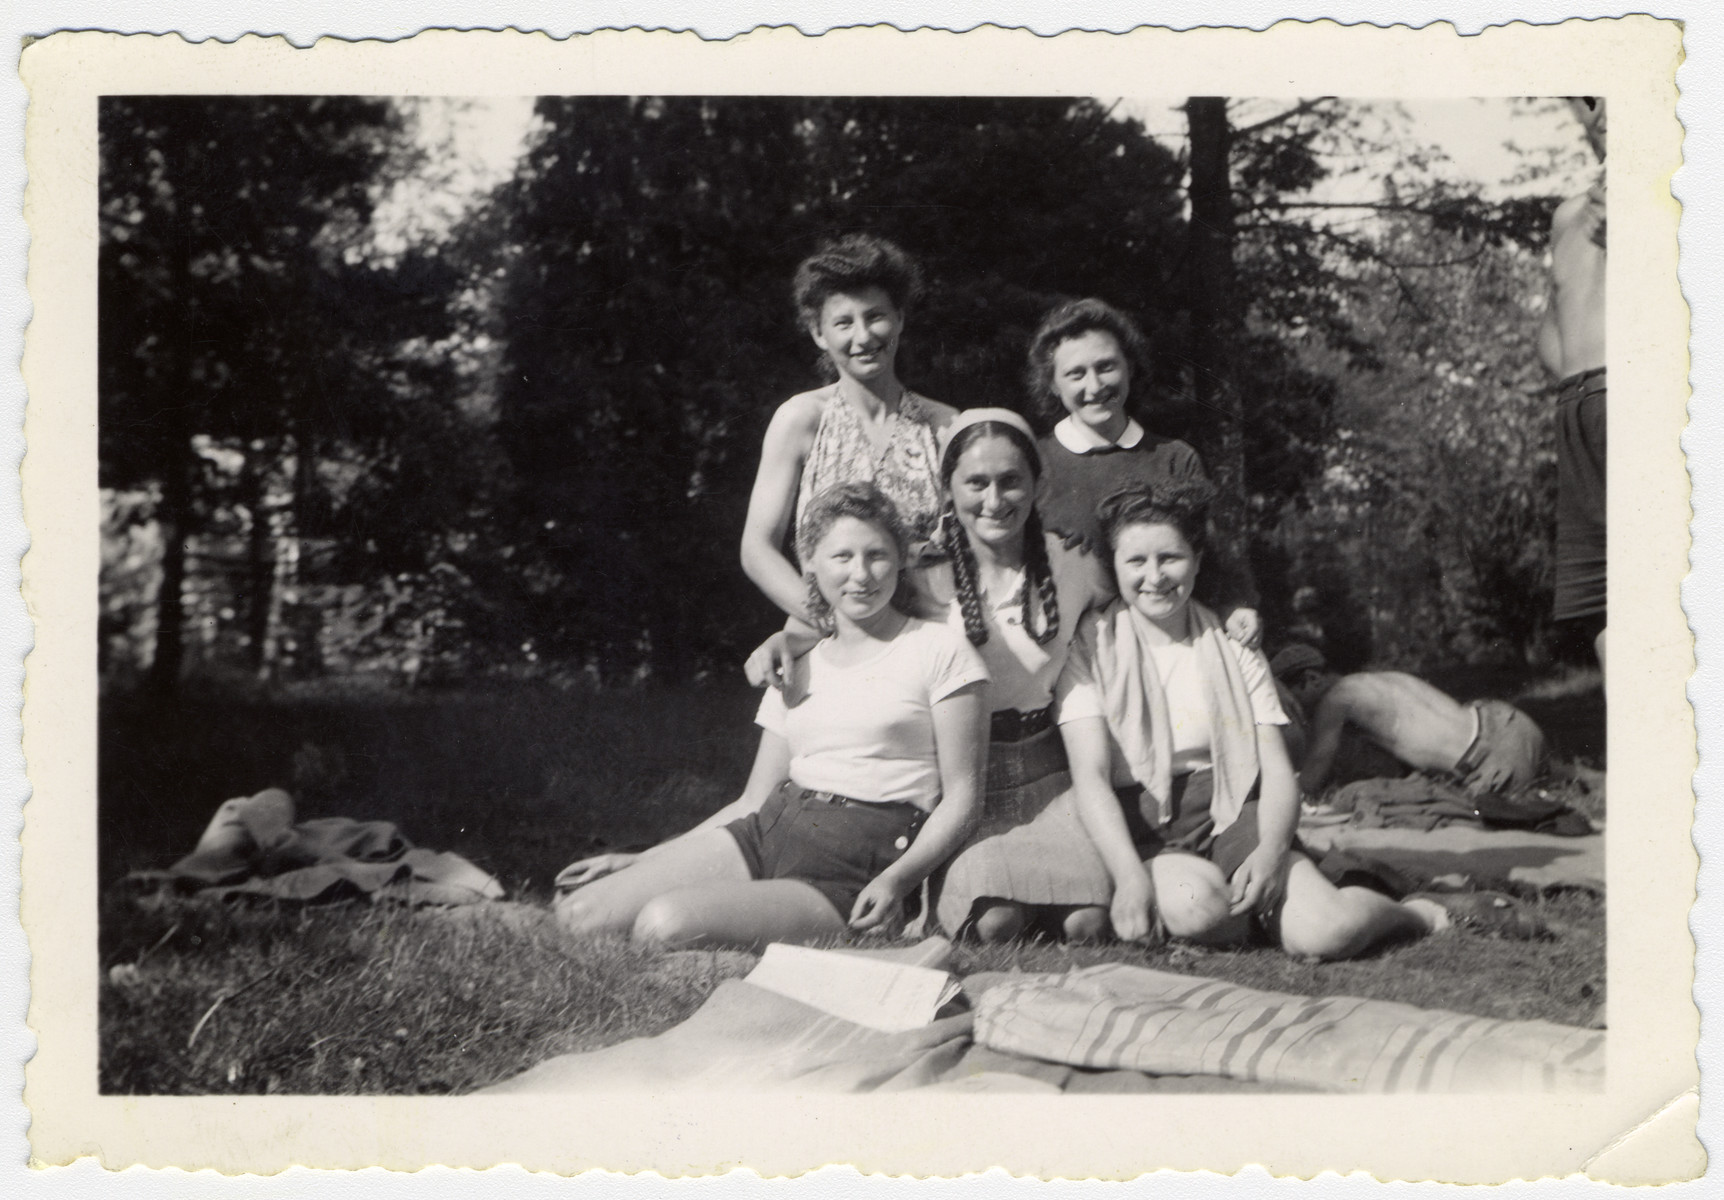 Group portrait of five teenage girls in the La Ramee agricultural school.

The school was established after Jewish students were expelled from general schools  and directed by Haroun Tazieff.